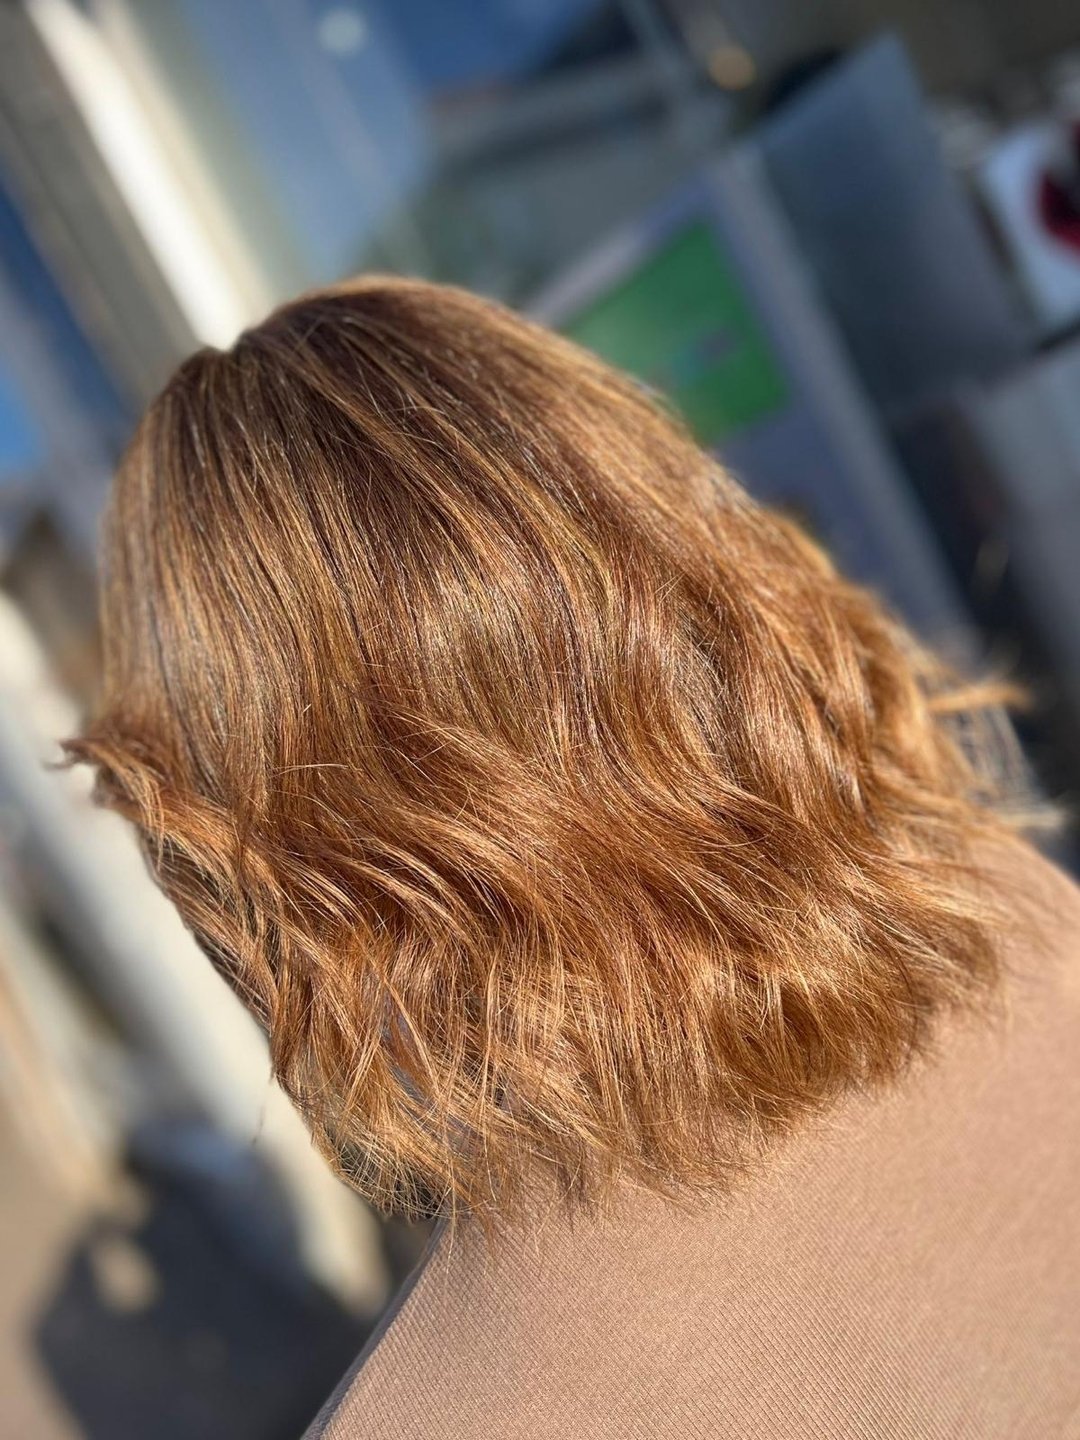 Effortlessly chic waves and a luminous shine &ndash; our client's shoulder-length, light brown hair is the epitome of understated glamour. Ready to unveil your own radiant look? Click the link in our bio and let's make your waves shine! 💫 #WavyElega